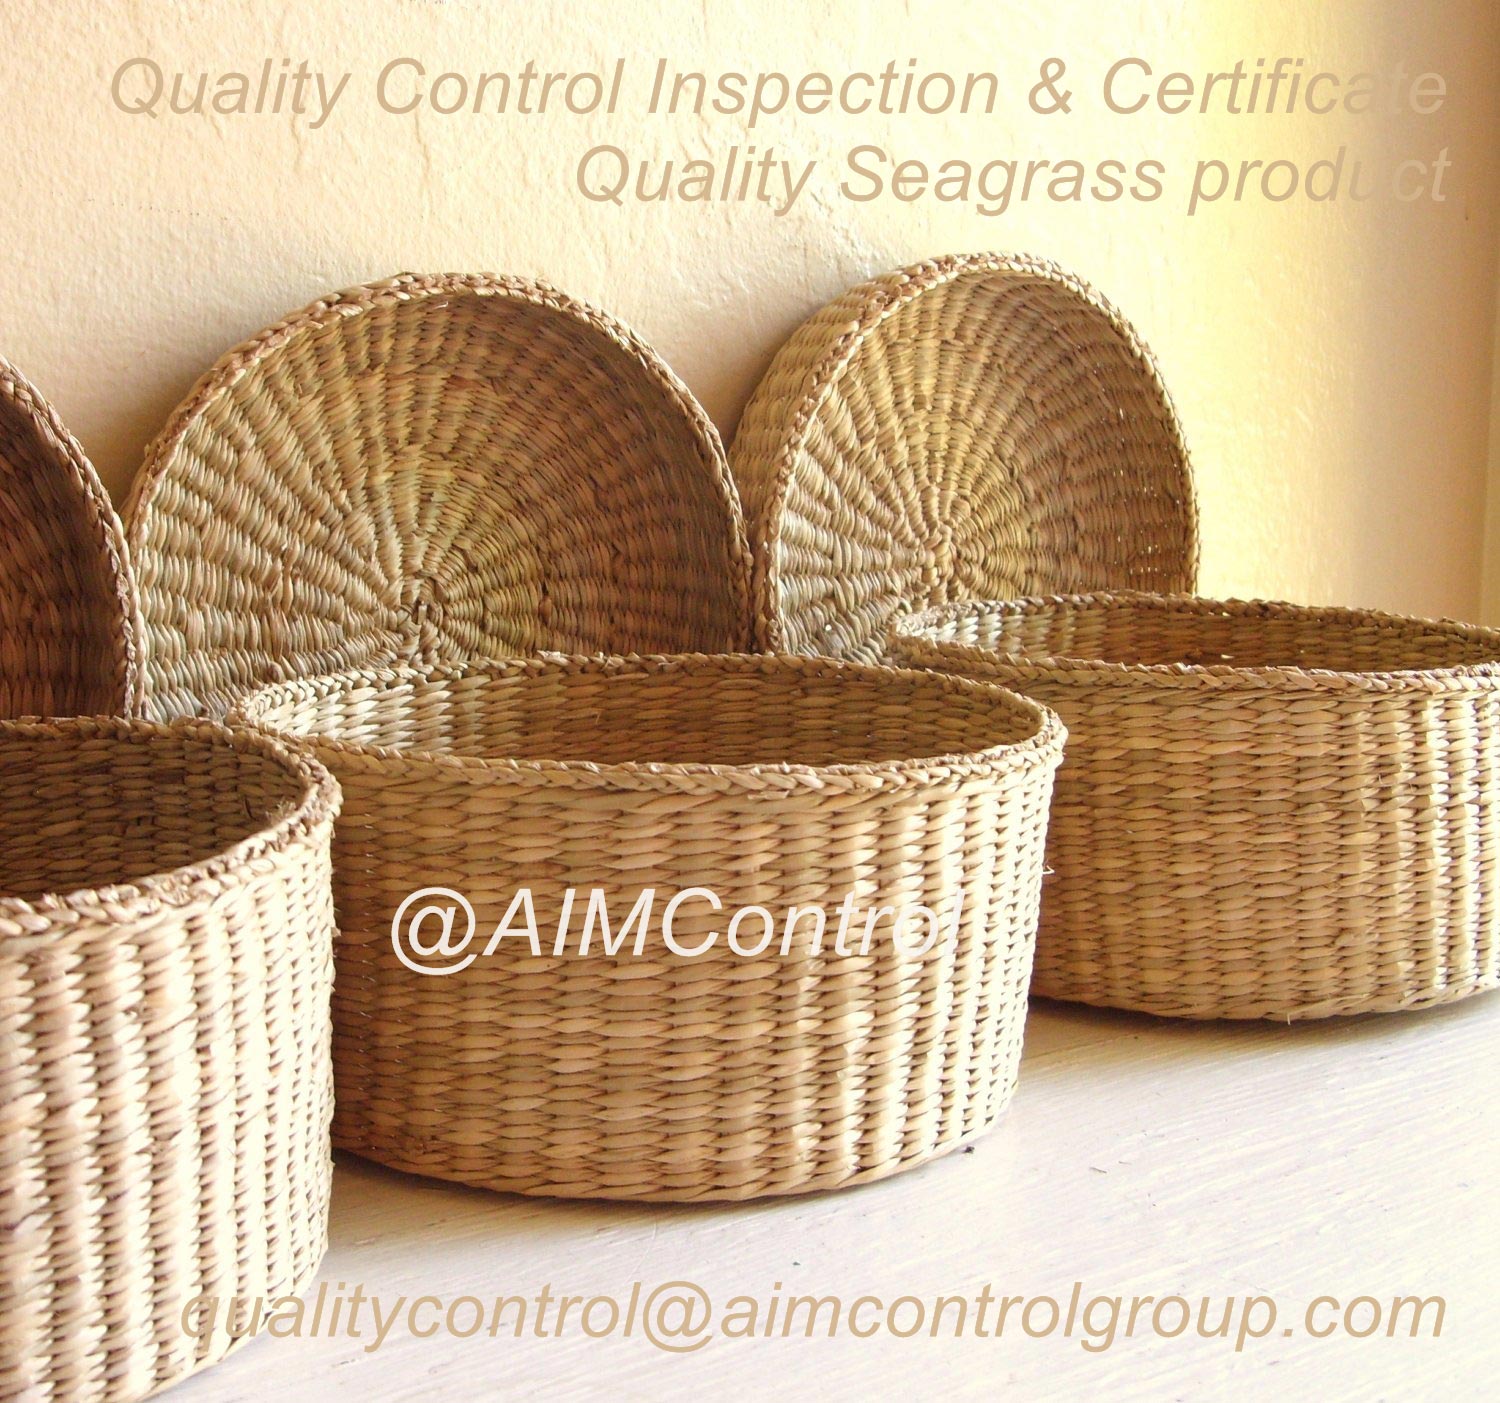 Seagrass_product_Quality_control_inspection_certification_AIM_Cntrol